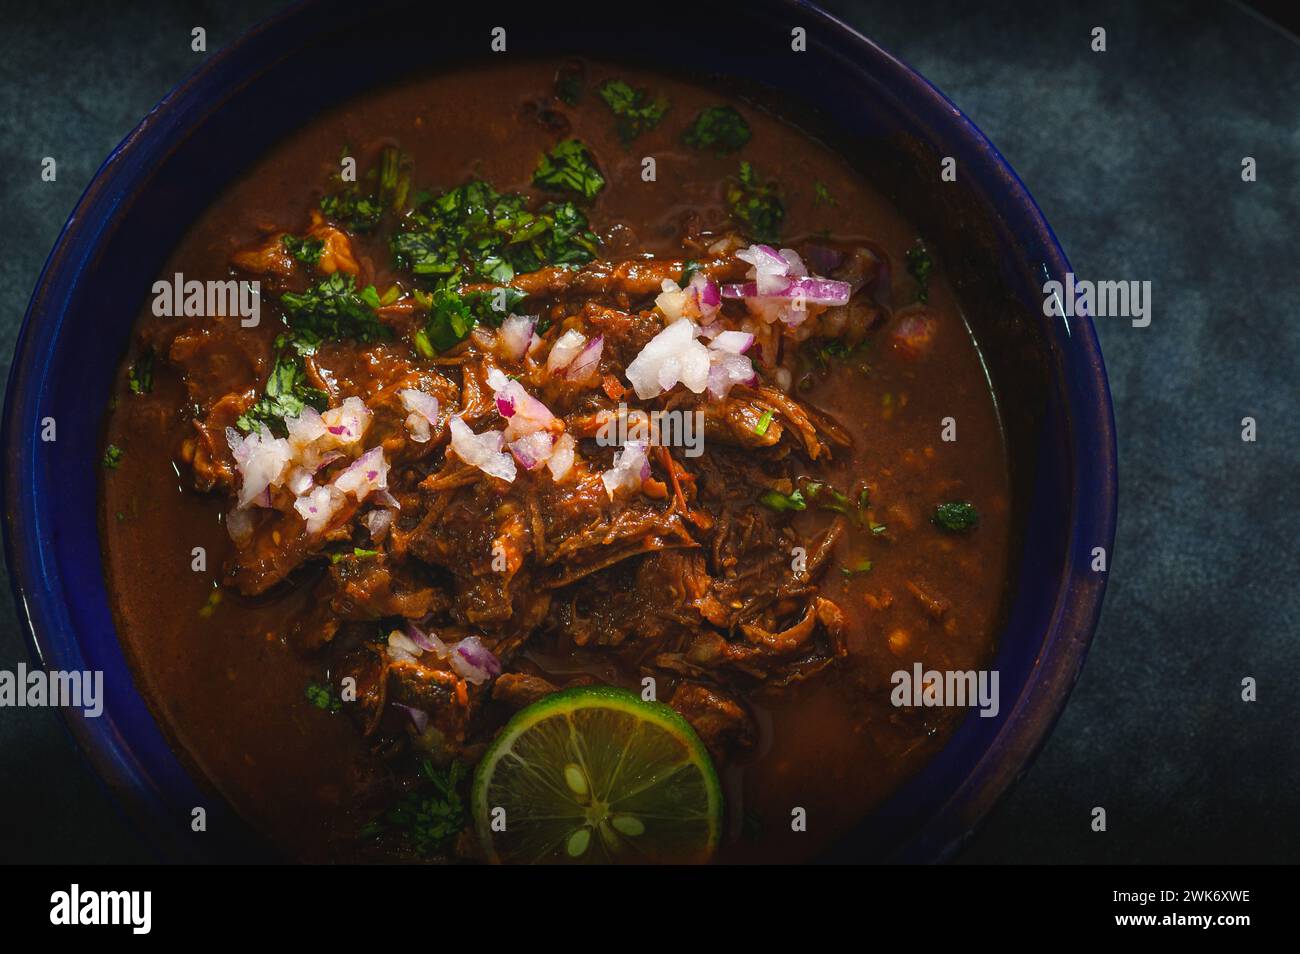 Bowl of Mexican Beef Birria Stew on Blue Background Stock Photo